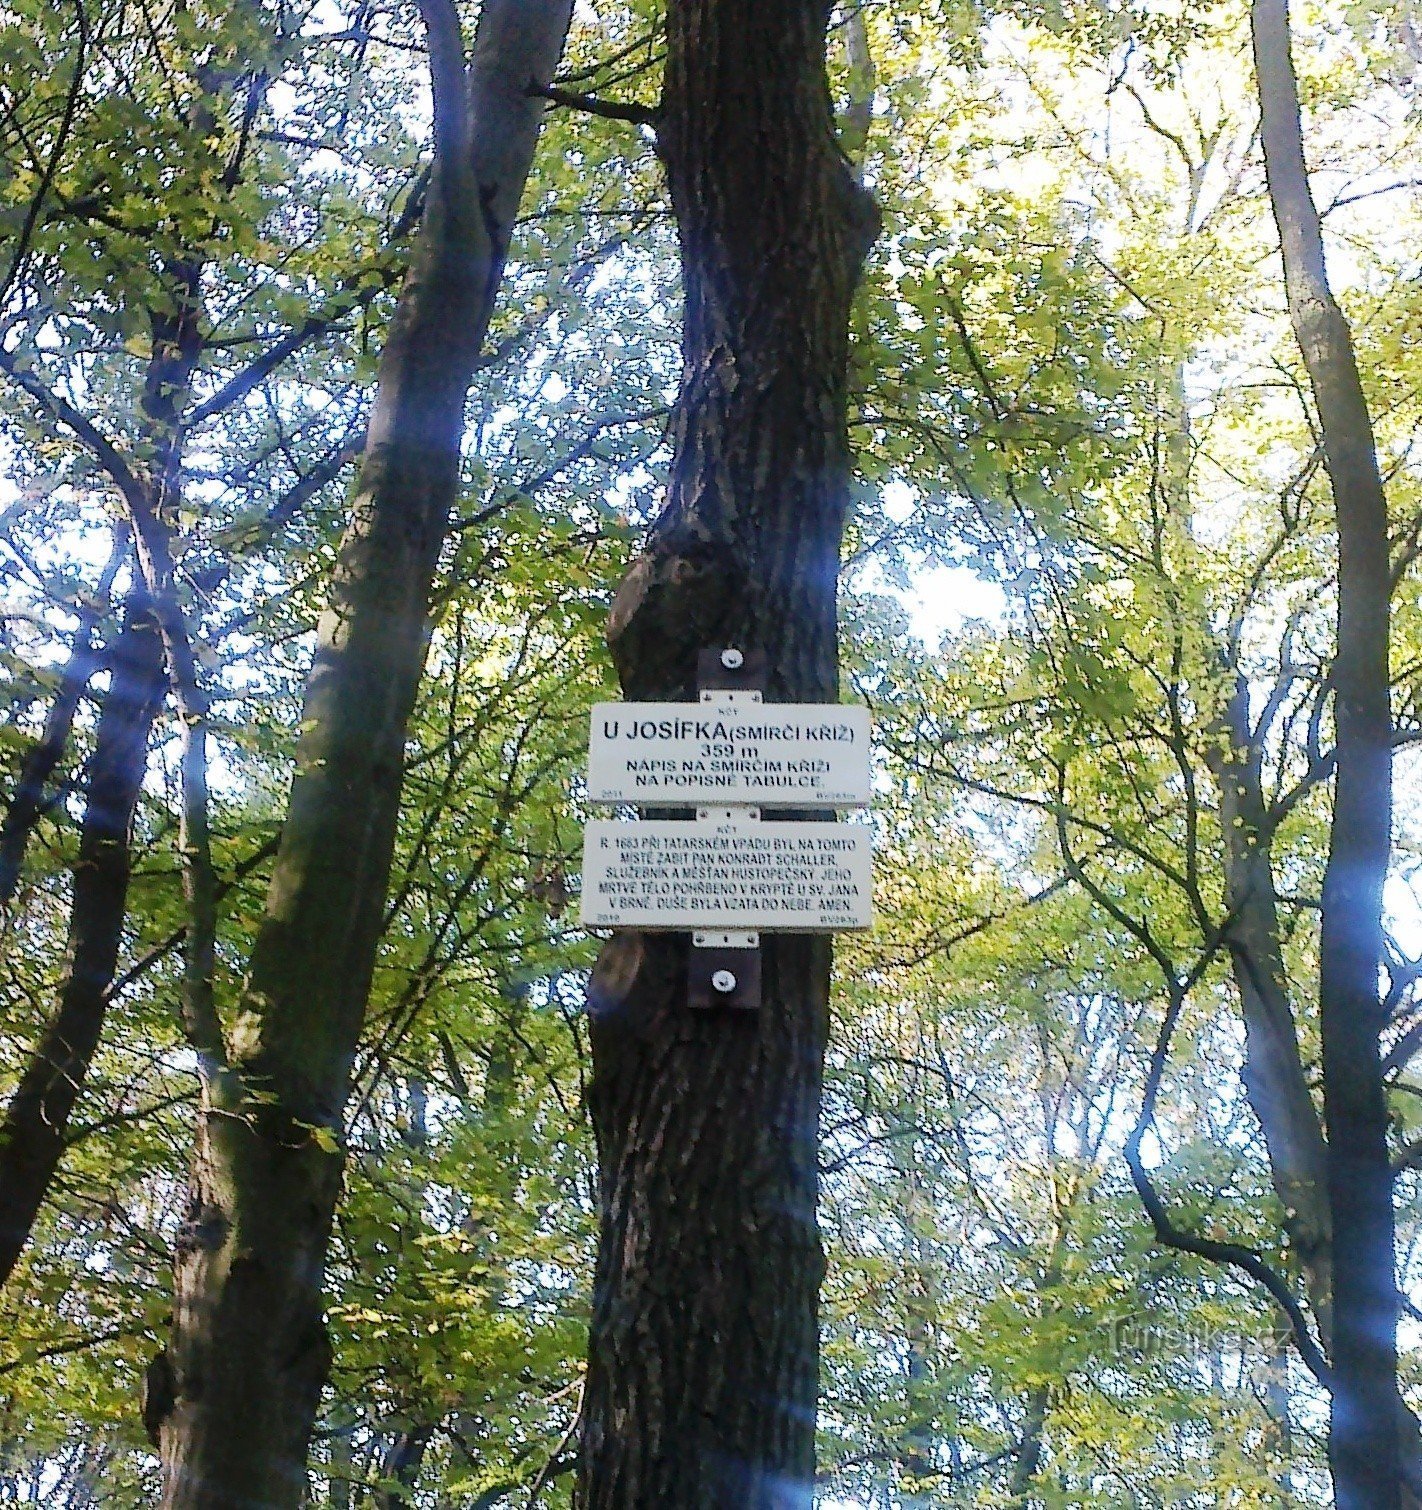 Information board at the cross